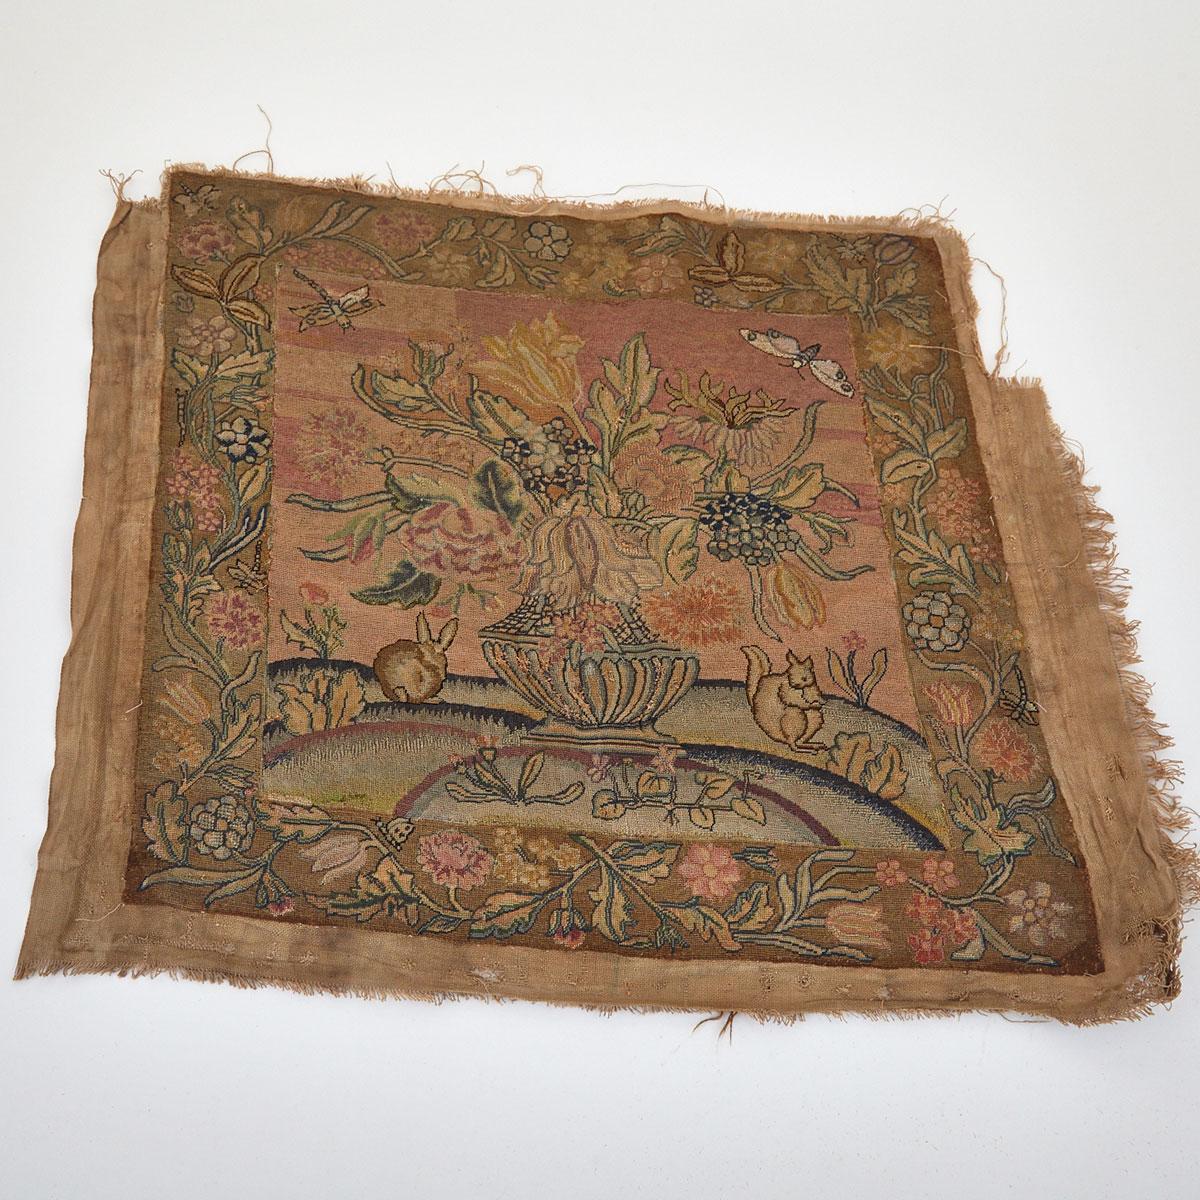 Pair of Needlework Upholstery Panels, late 17th/early 18th century